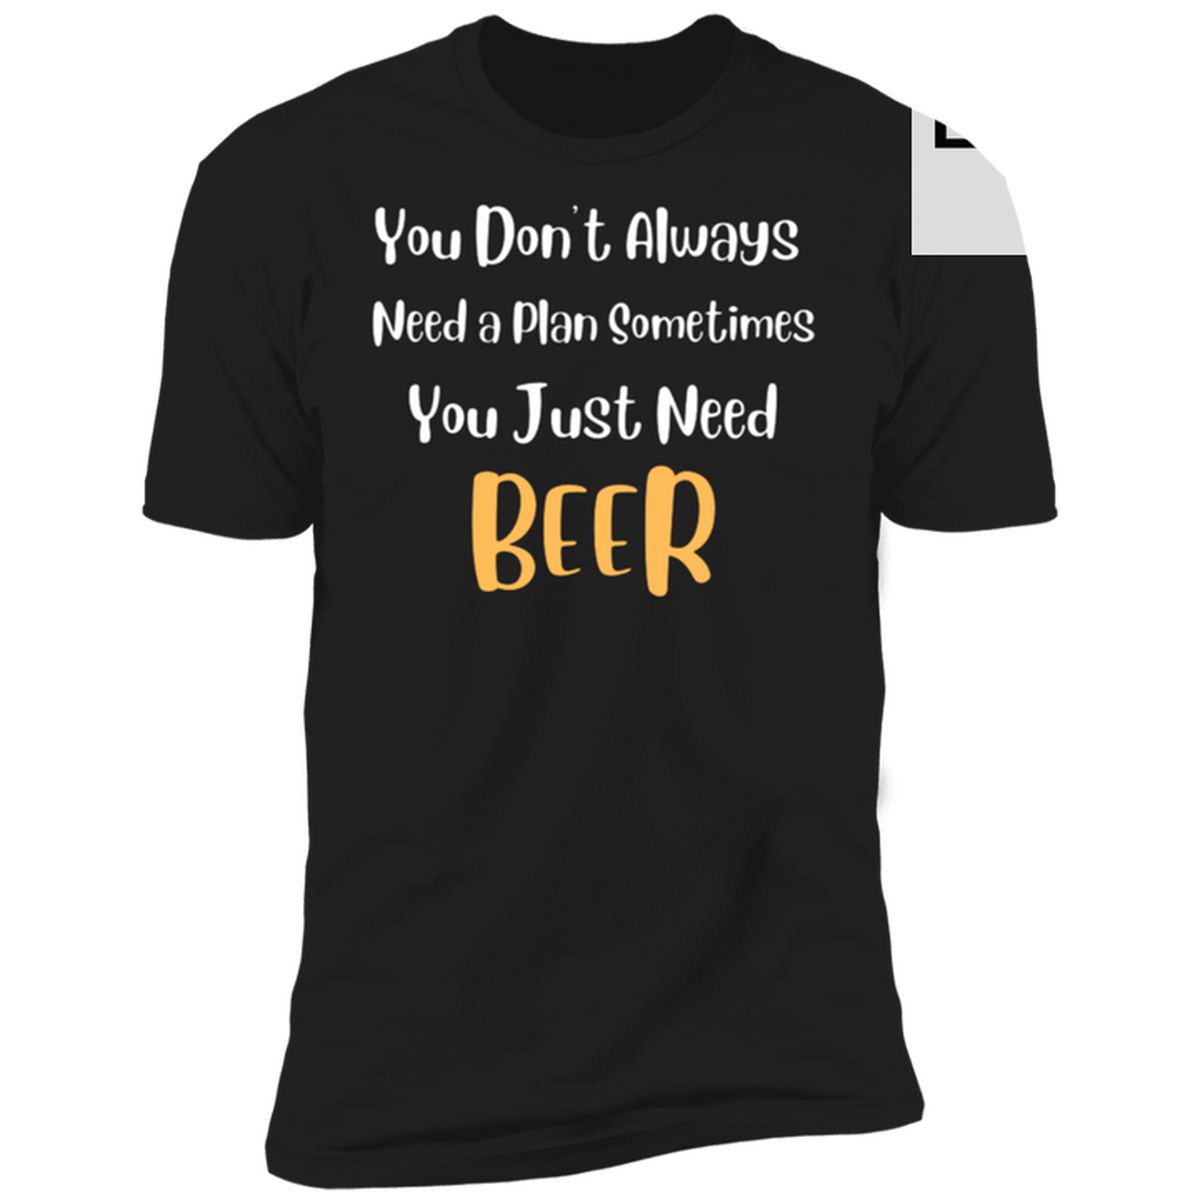 You Don't Always Need A Plan Sometimes You Just Need Beer Shirt